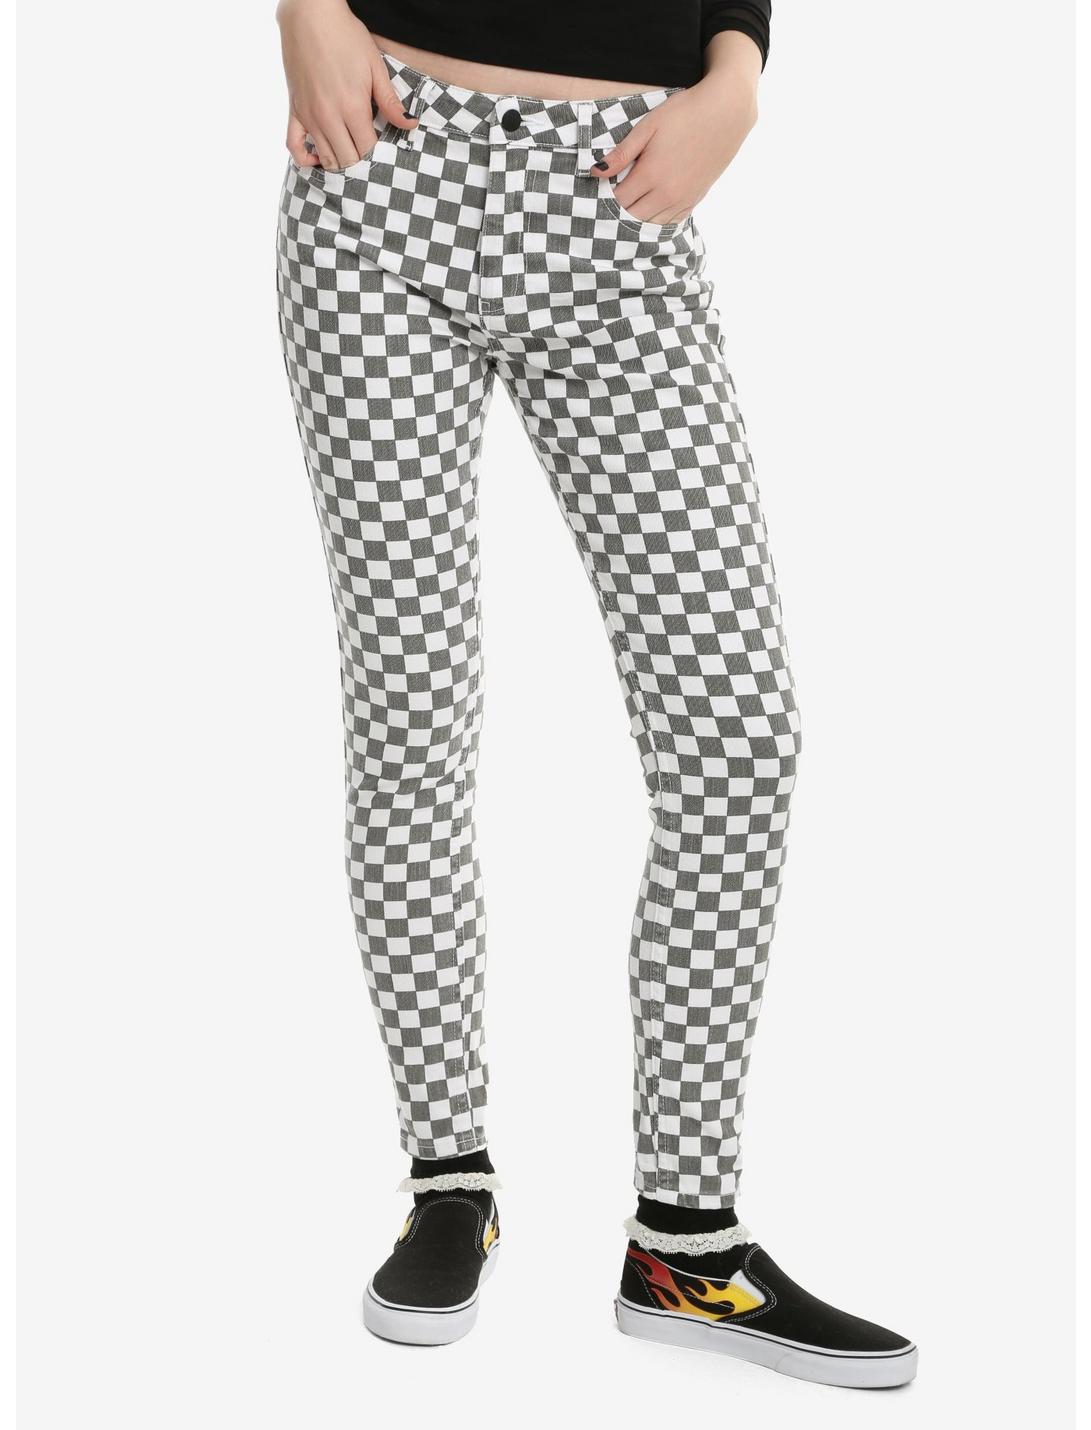 Dickies Grey & White Checkered Skinny Jeans, , hi-res